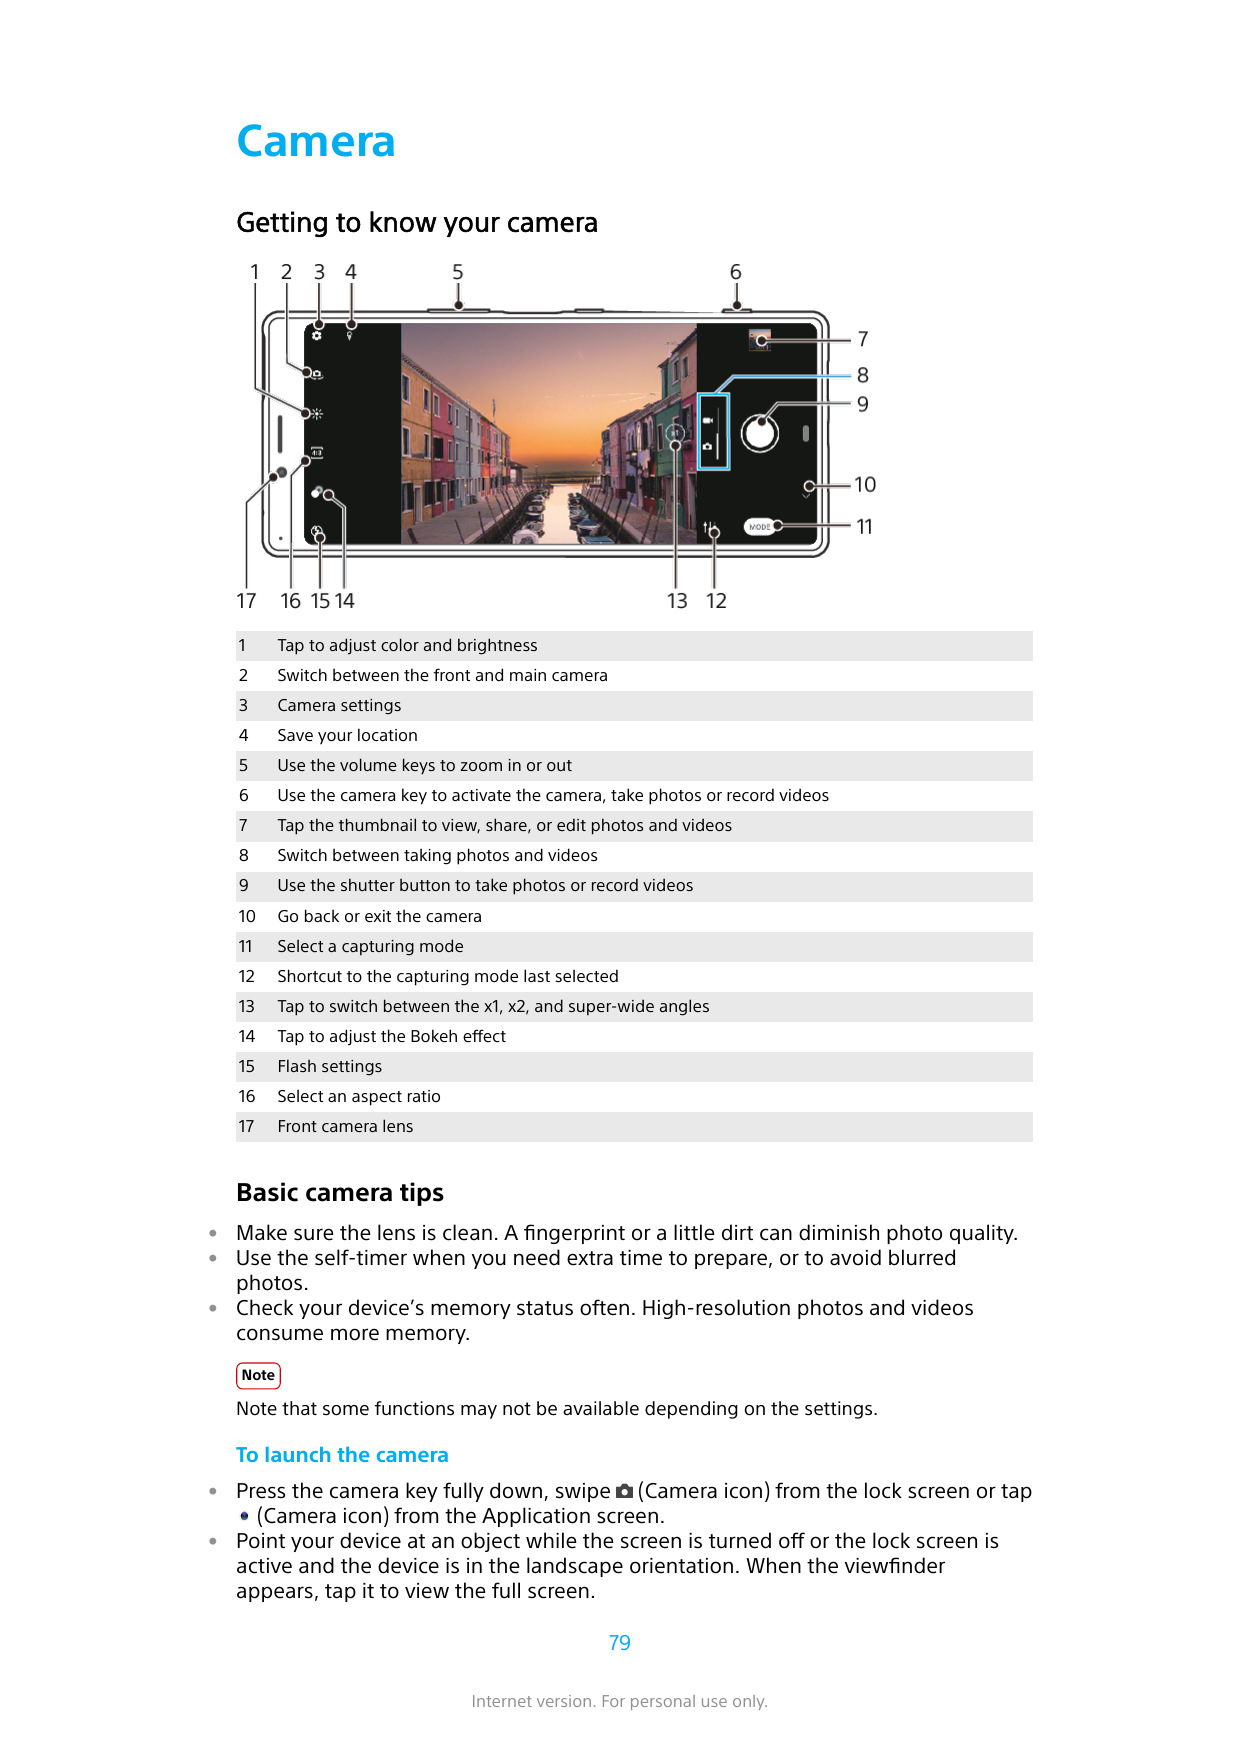 CameraGetting to know your camera1Tap to adjust color and brightness2Switch between the front and main camera3Camera settings4Sa